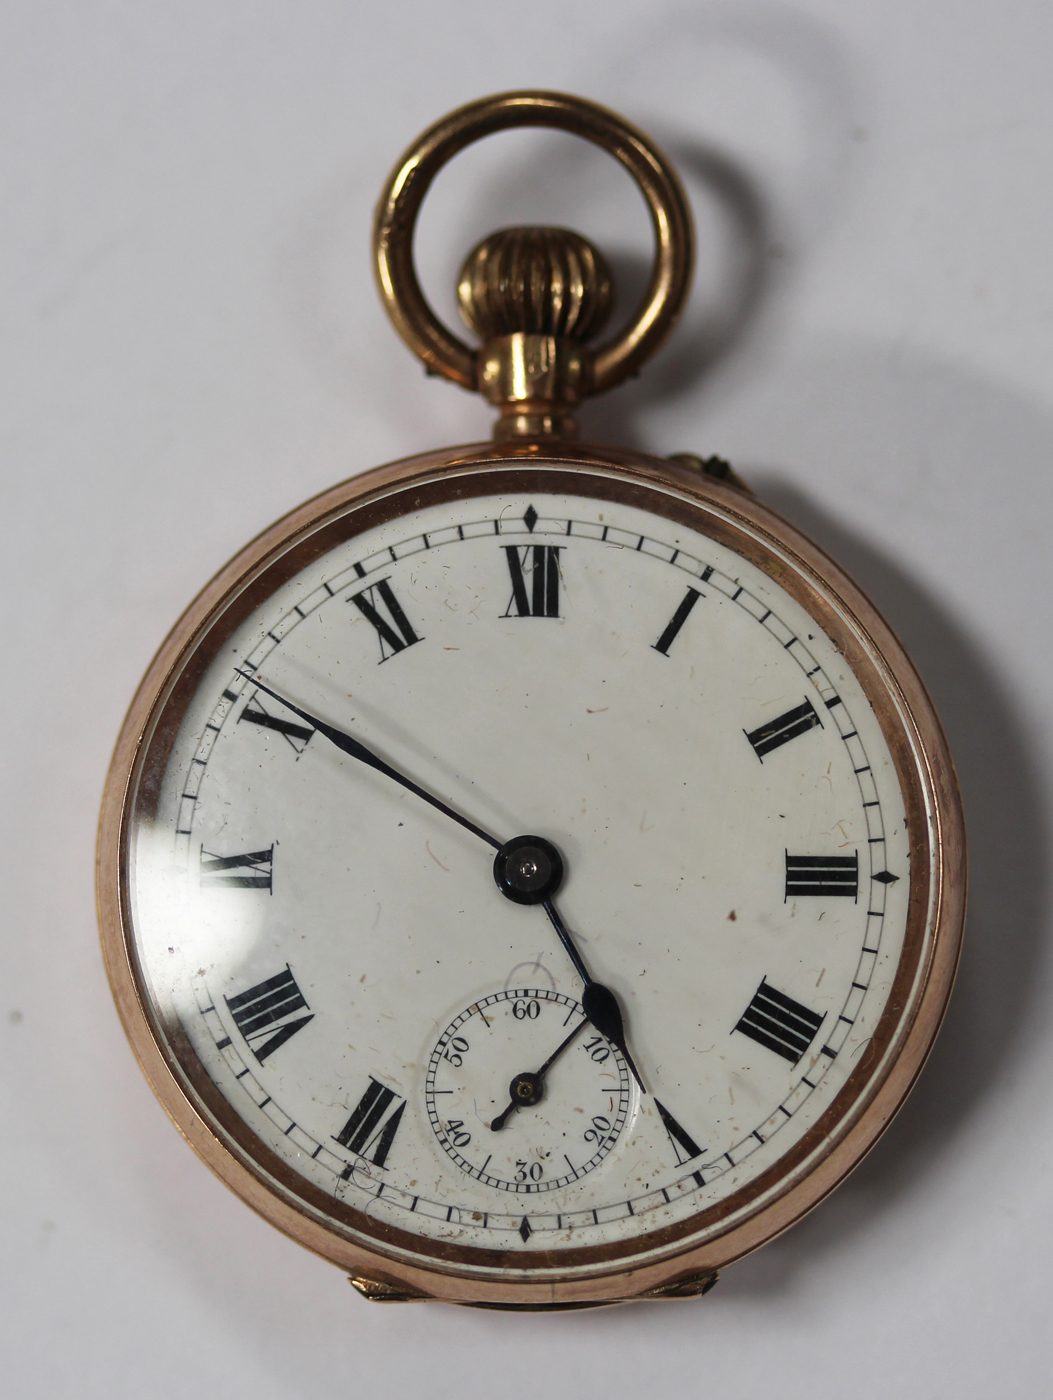 A 9ct gold keyless wind open faced lady's fob watch, the enamelled dial with Roman numerals and